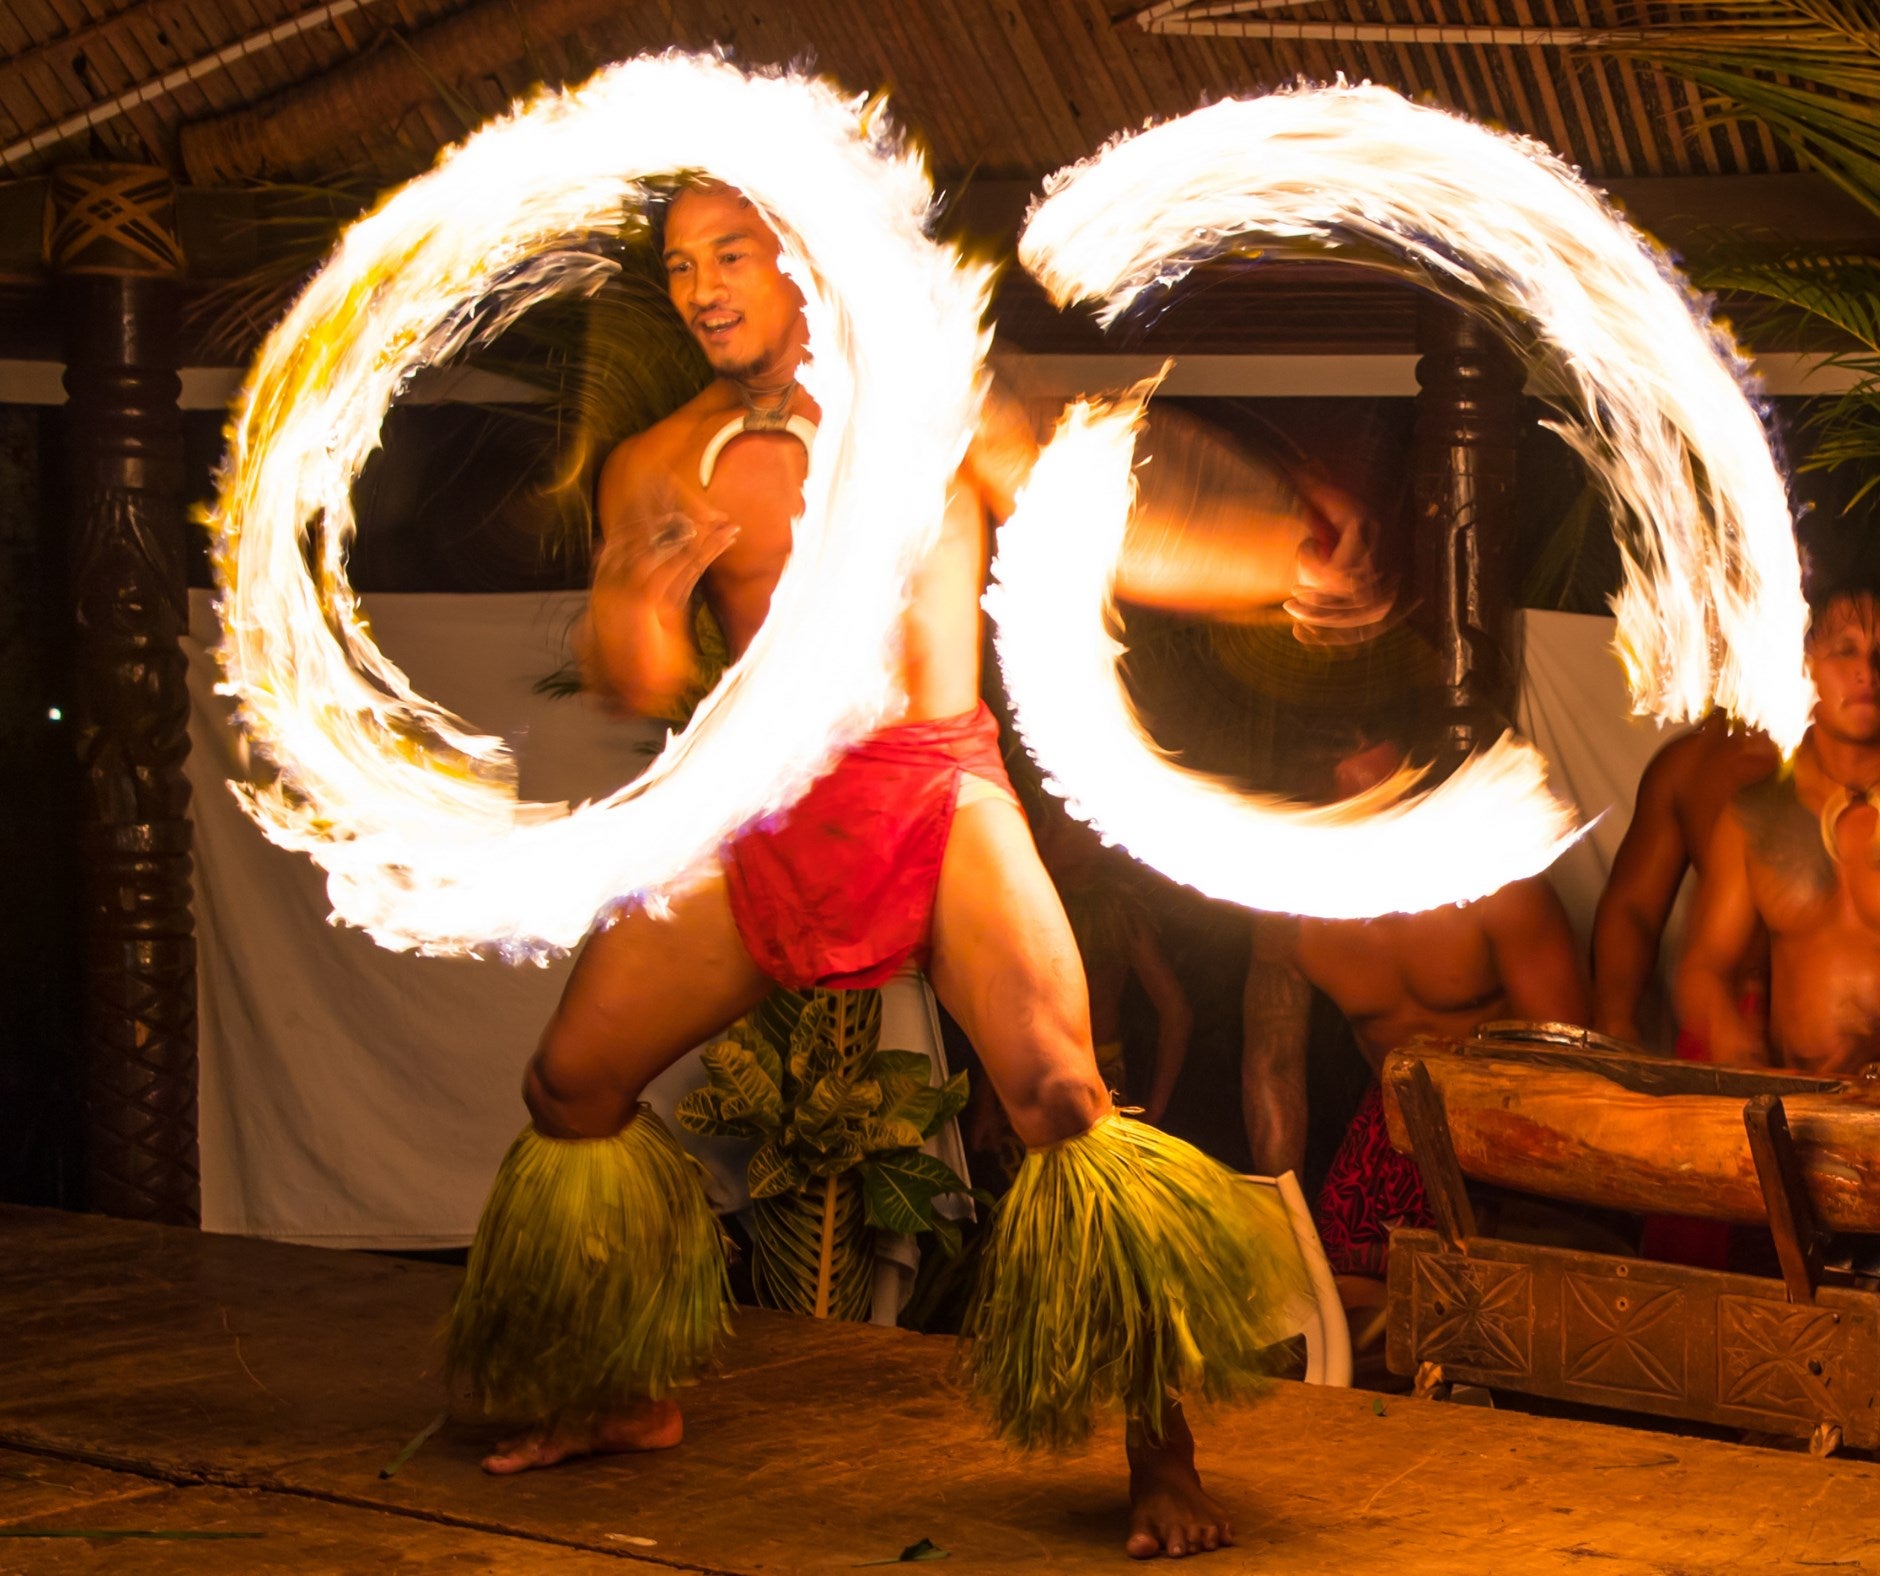 Siva afi, or fire knife dancing, is just one of Samoa’s proud traditions